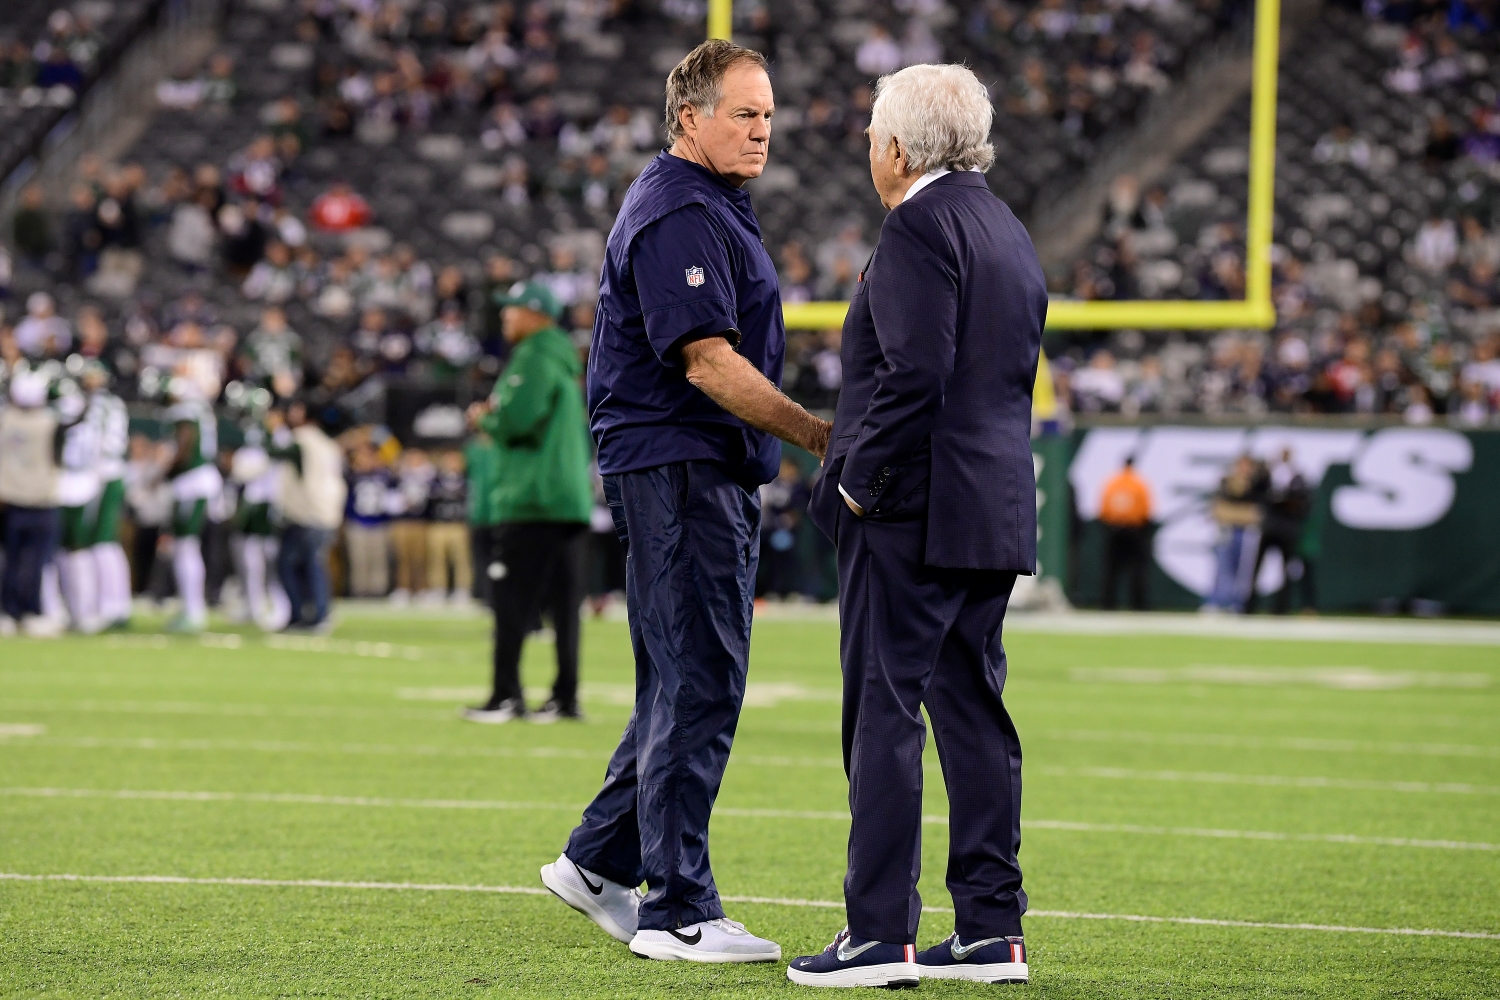 Bill Belichick shakes hands with New England Patriots owner Robert Kraft before a game.